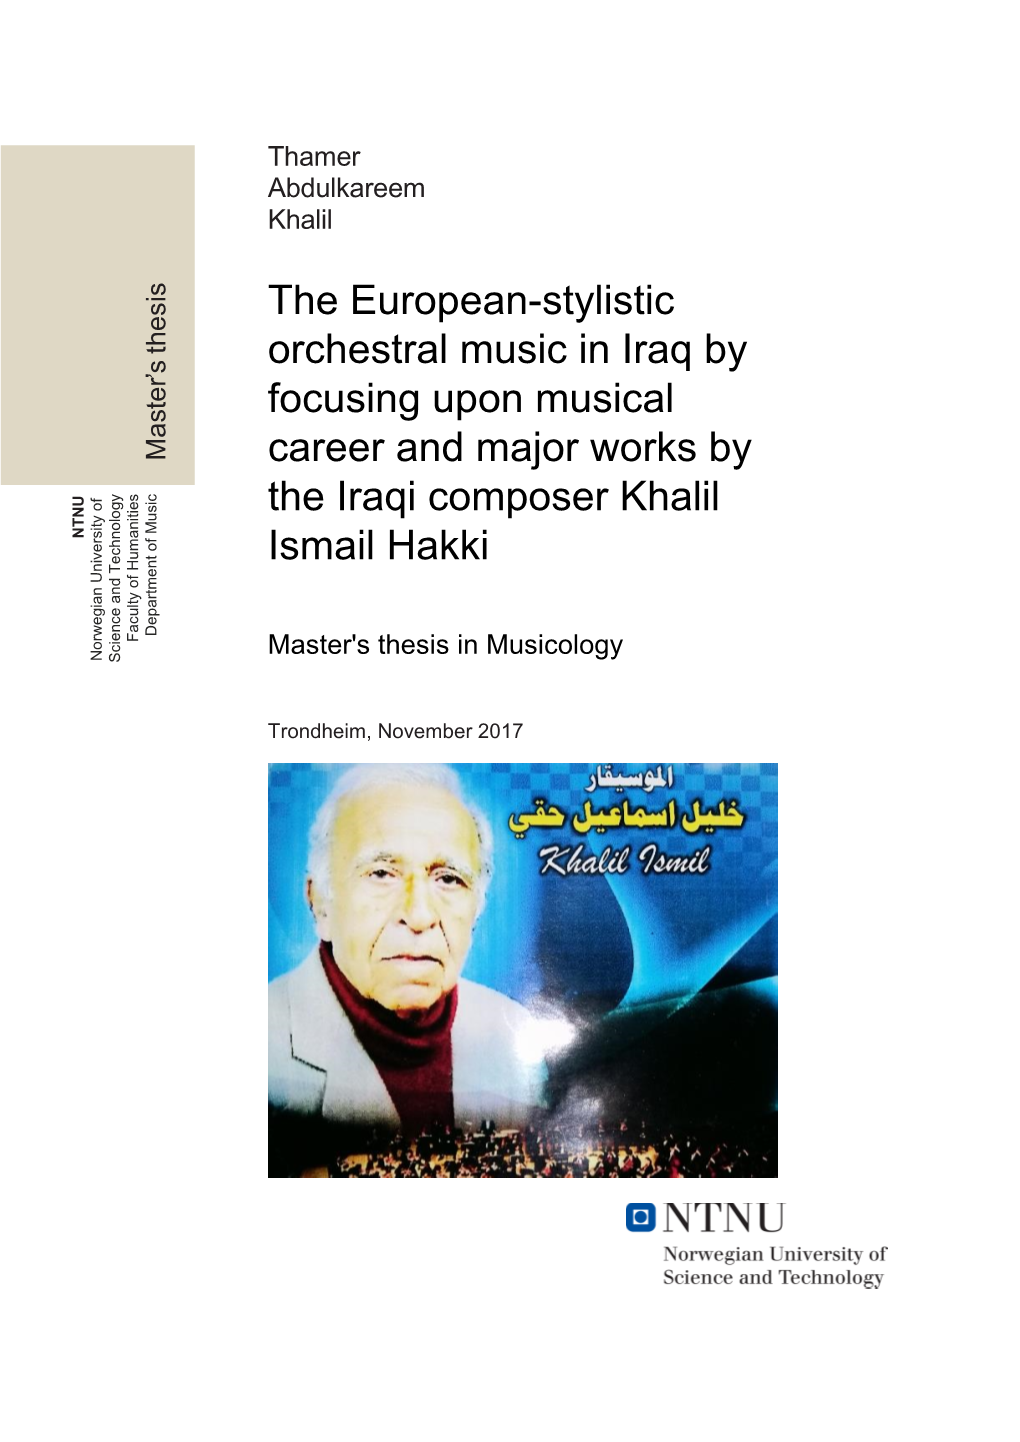 The European-Stylistic Orchestral Music in Iraq by Focusing Upon Musical Career and Major Works by the Iraqi Composer Khalil Ismail Hakki